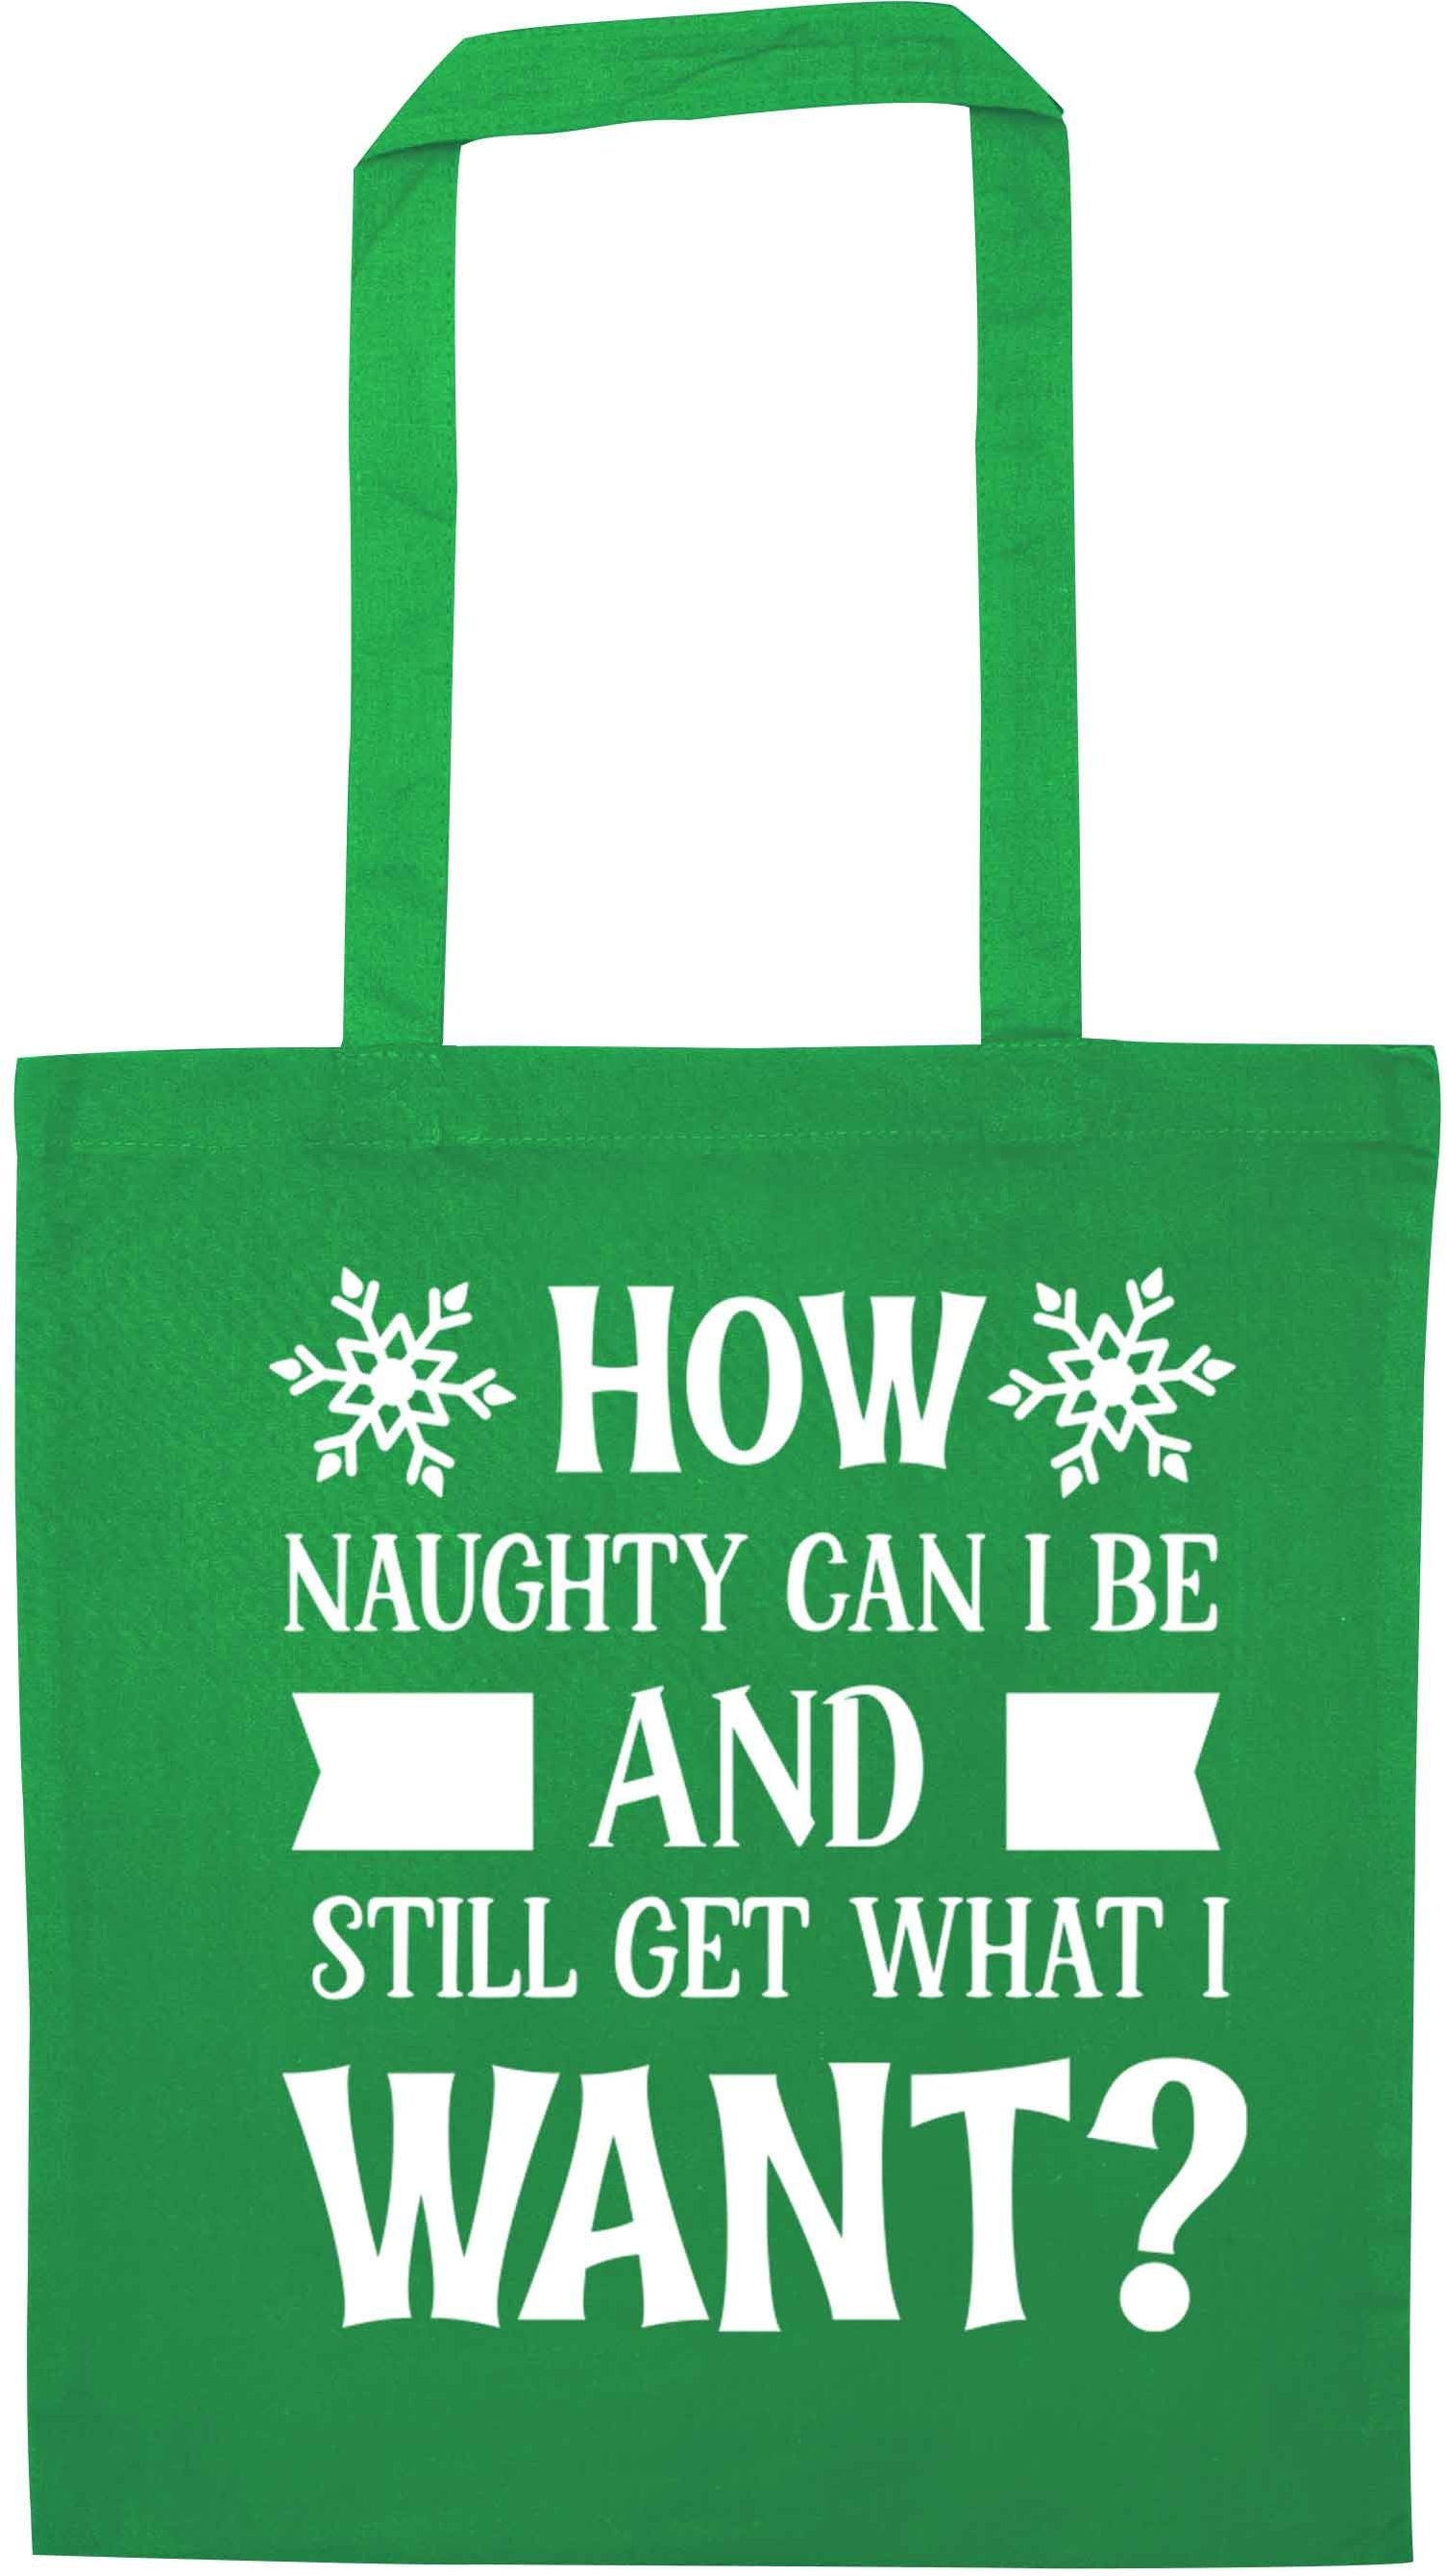 How naughty can I be and still get what I want? green tote bag